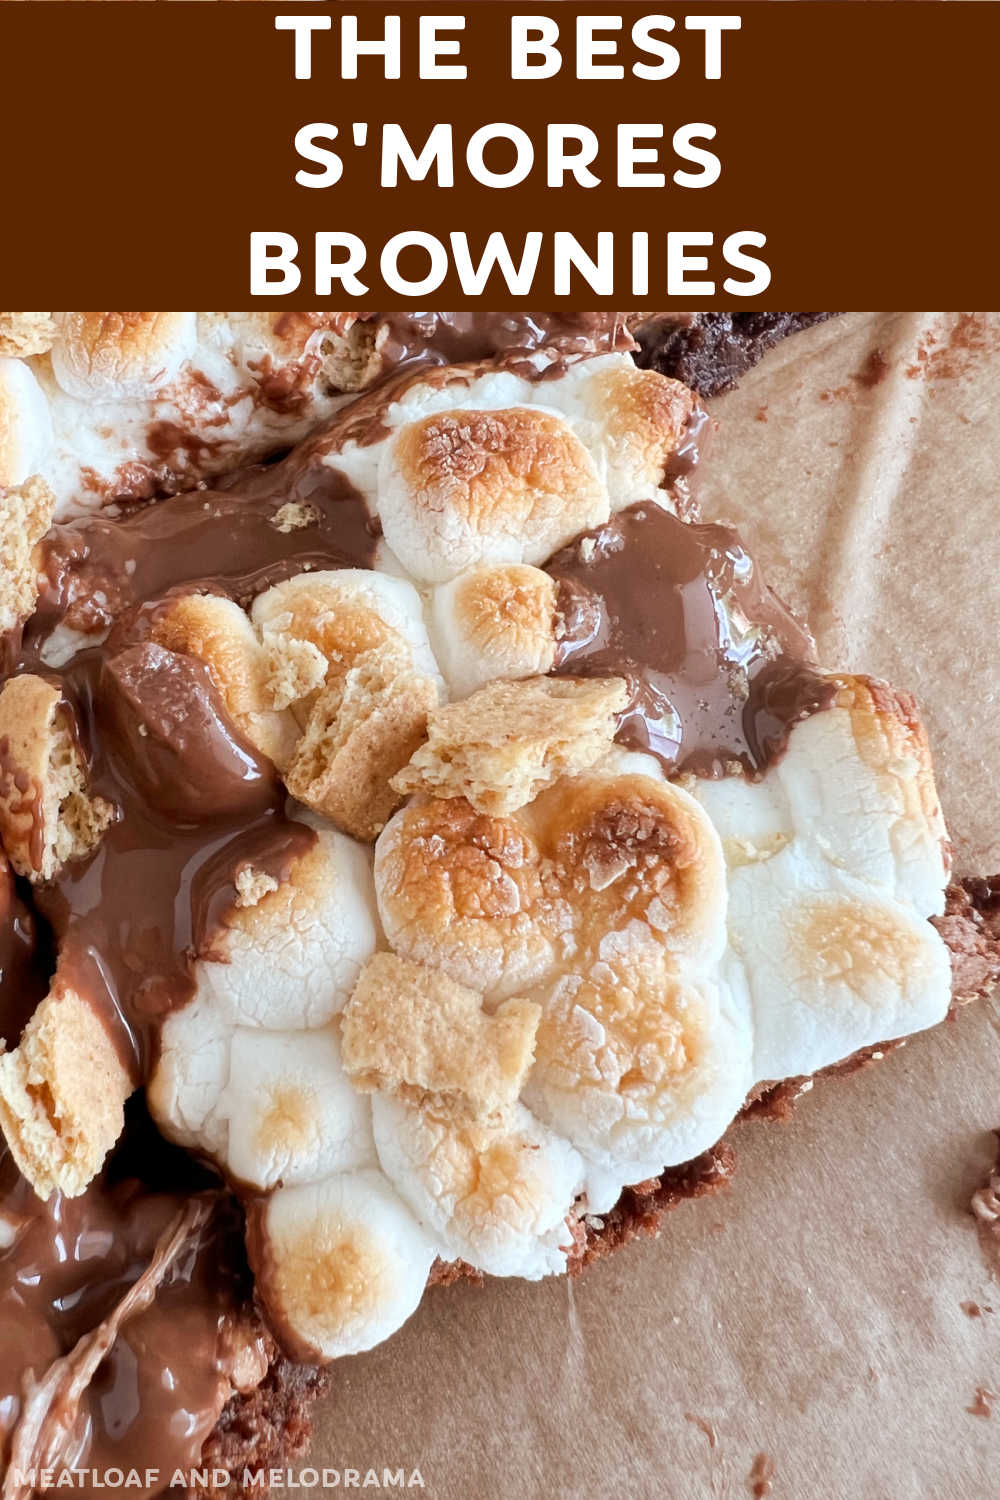 This S'mores Brownies recipe makes fudgy brownies topped with toasted marshmallows, graham crackers and chocolate bars. A delicious dessert you can make in one bowl. The whole family loves these homemade brownies! via @meamel